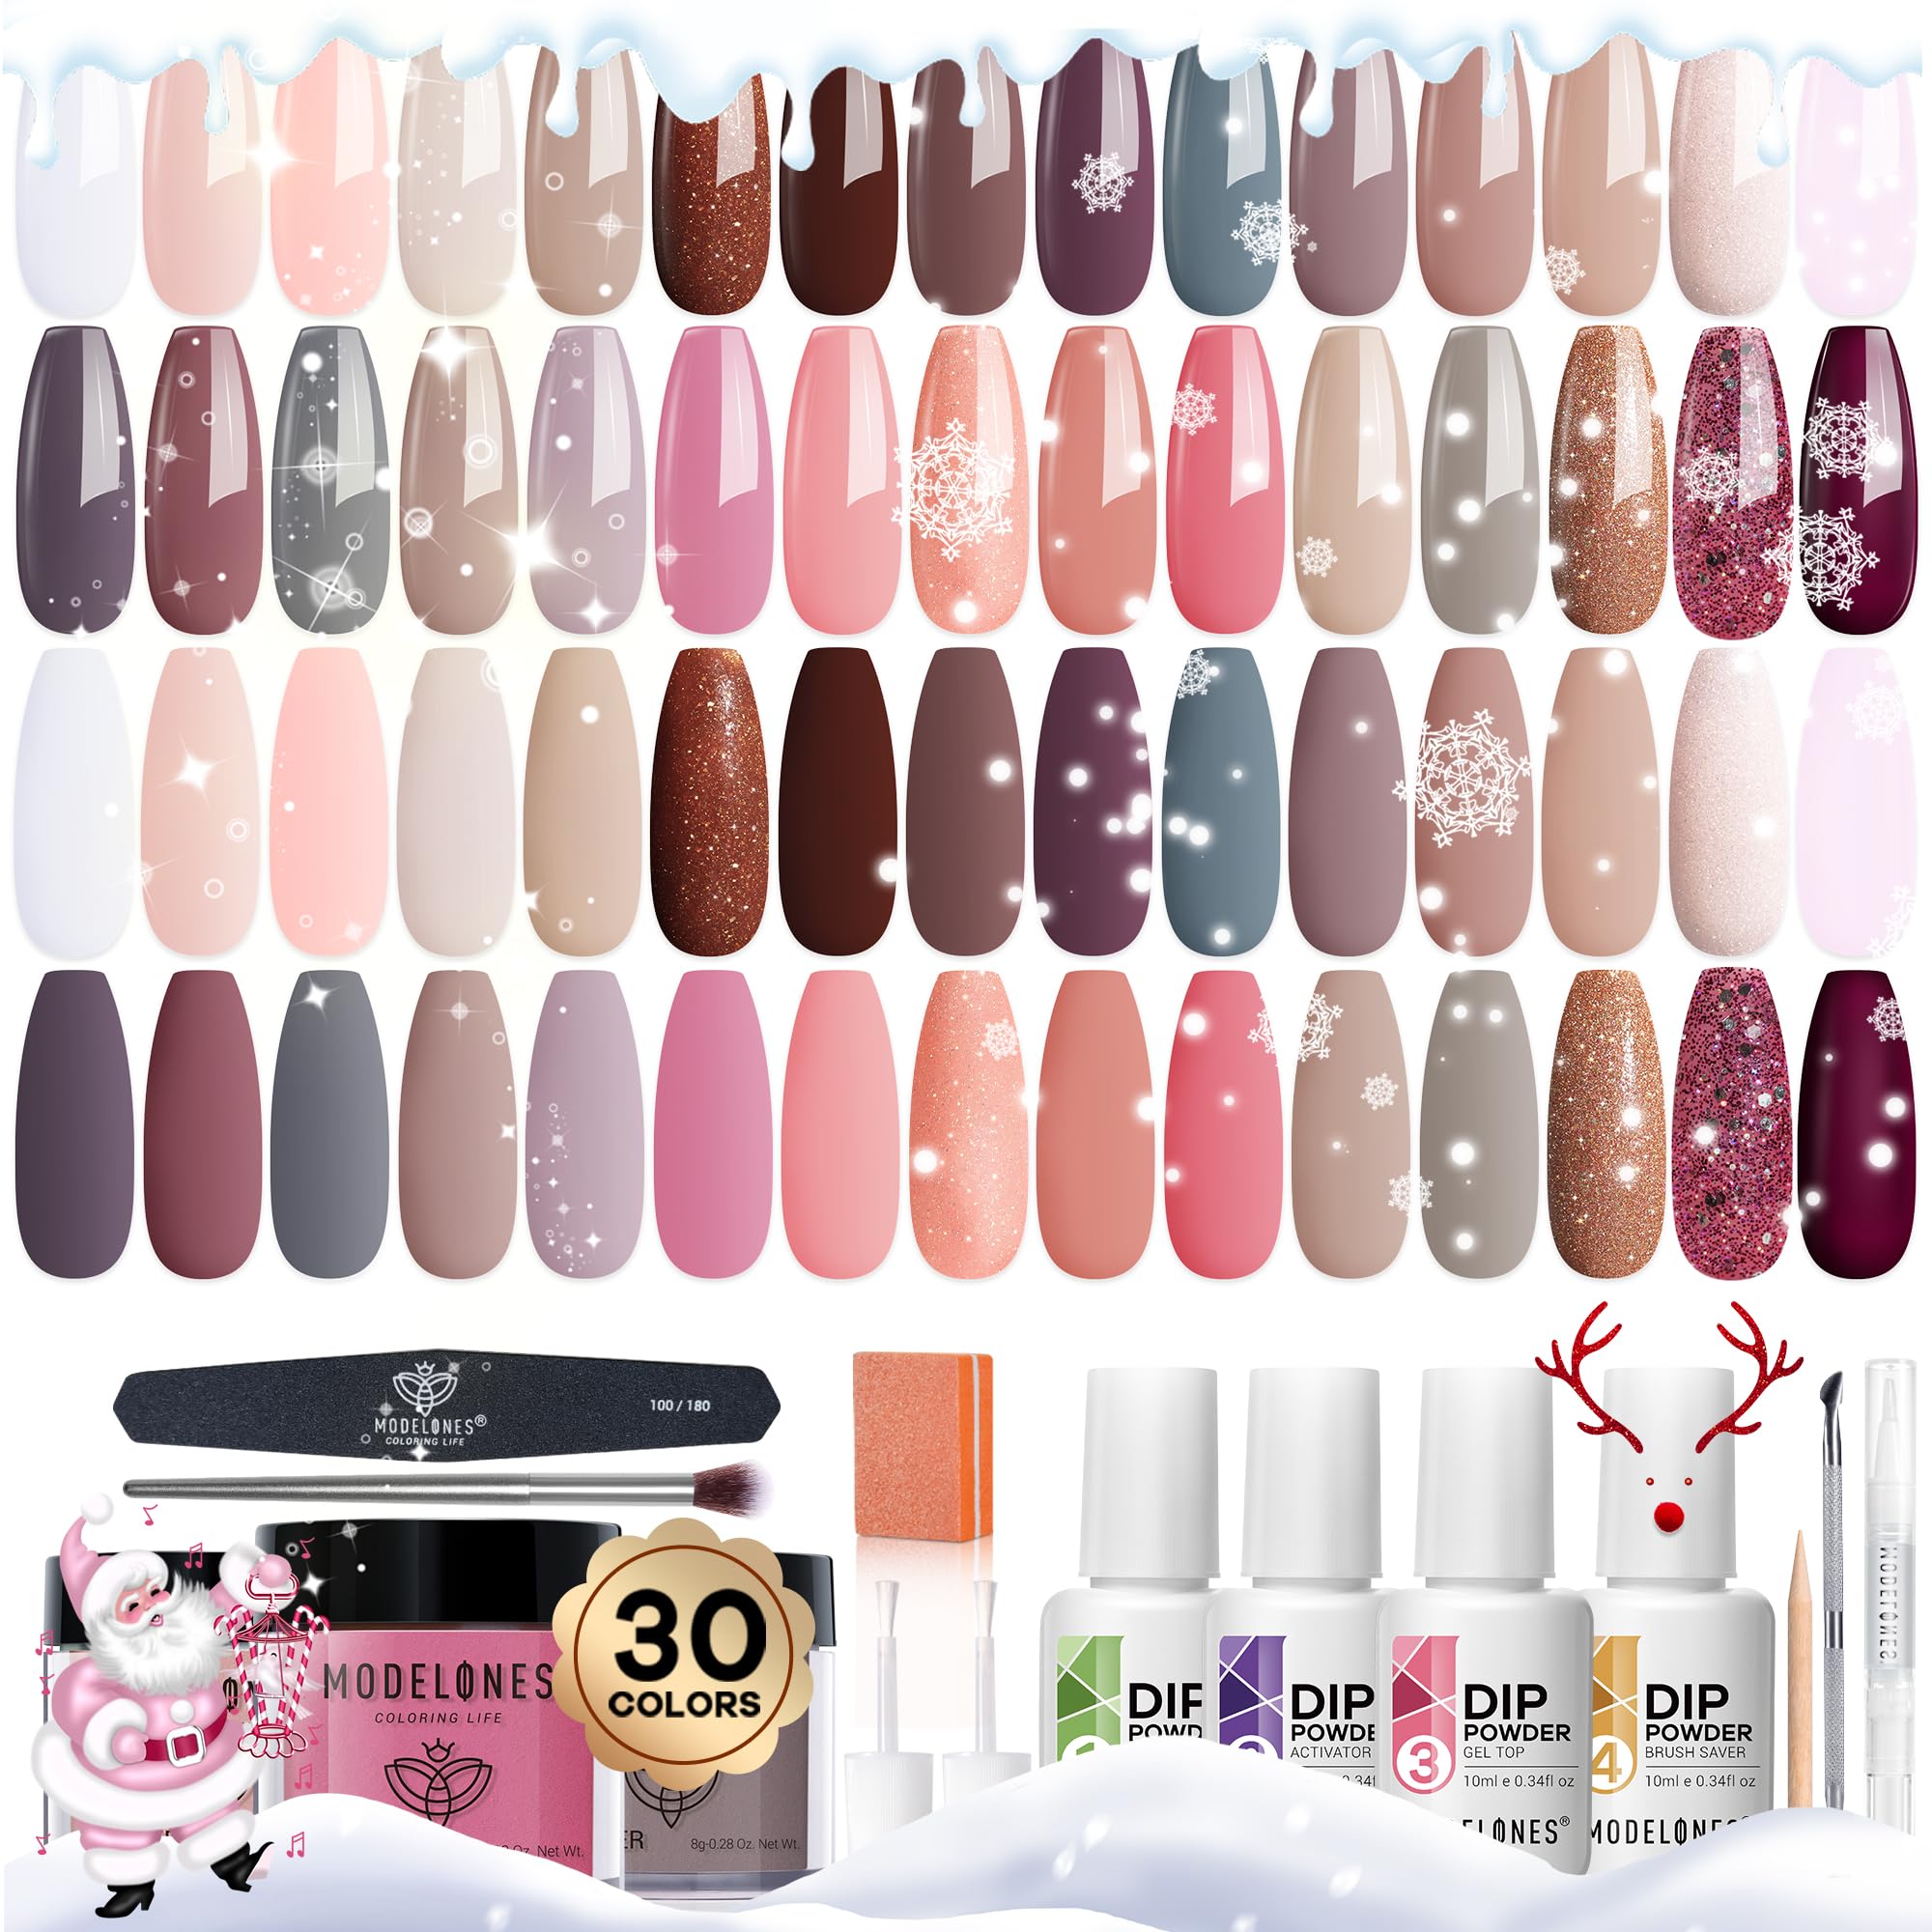 Modelones 42 Pcs Dip Powder Nail Kit Starter, 30 Colors Skin Tones Pink Brown Nude Neutral Dipping with Base Top Coat Activator 